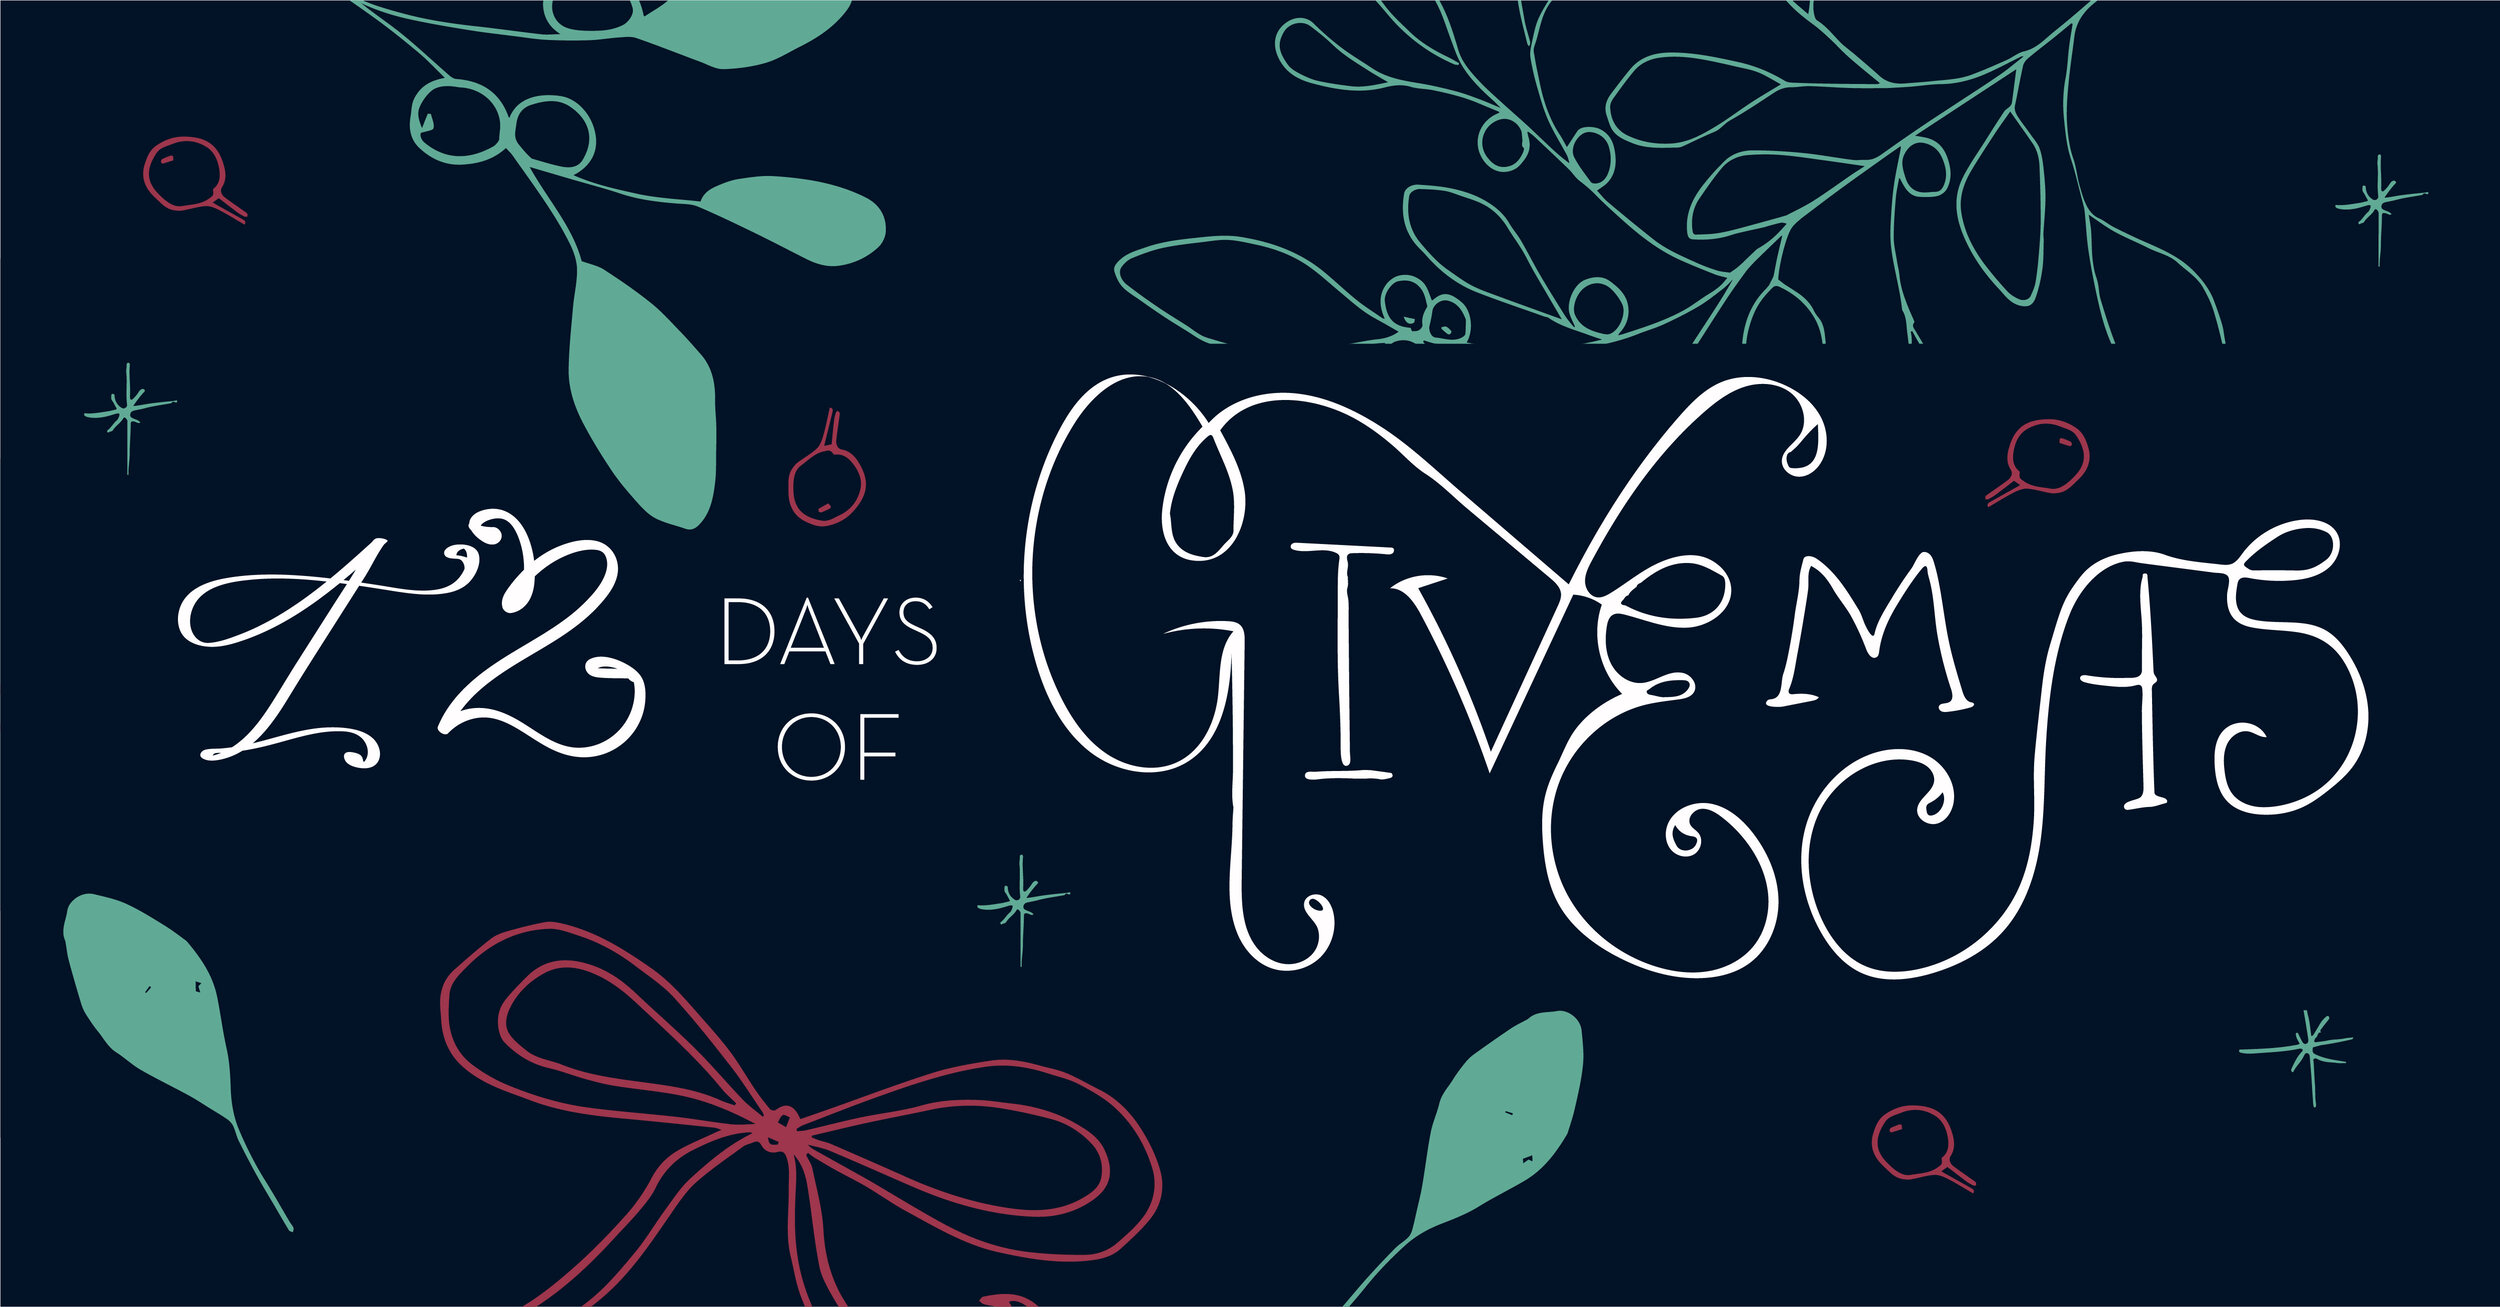 The 12 Days of Givemas